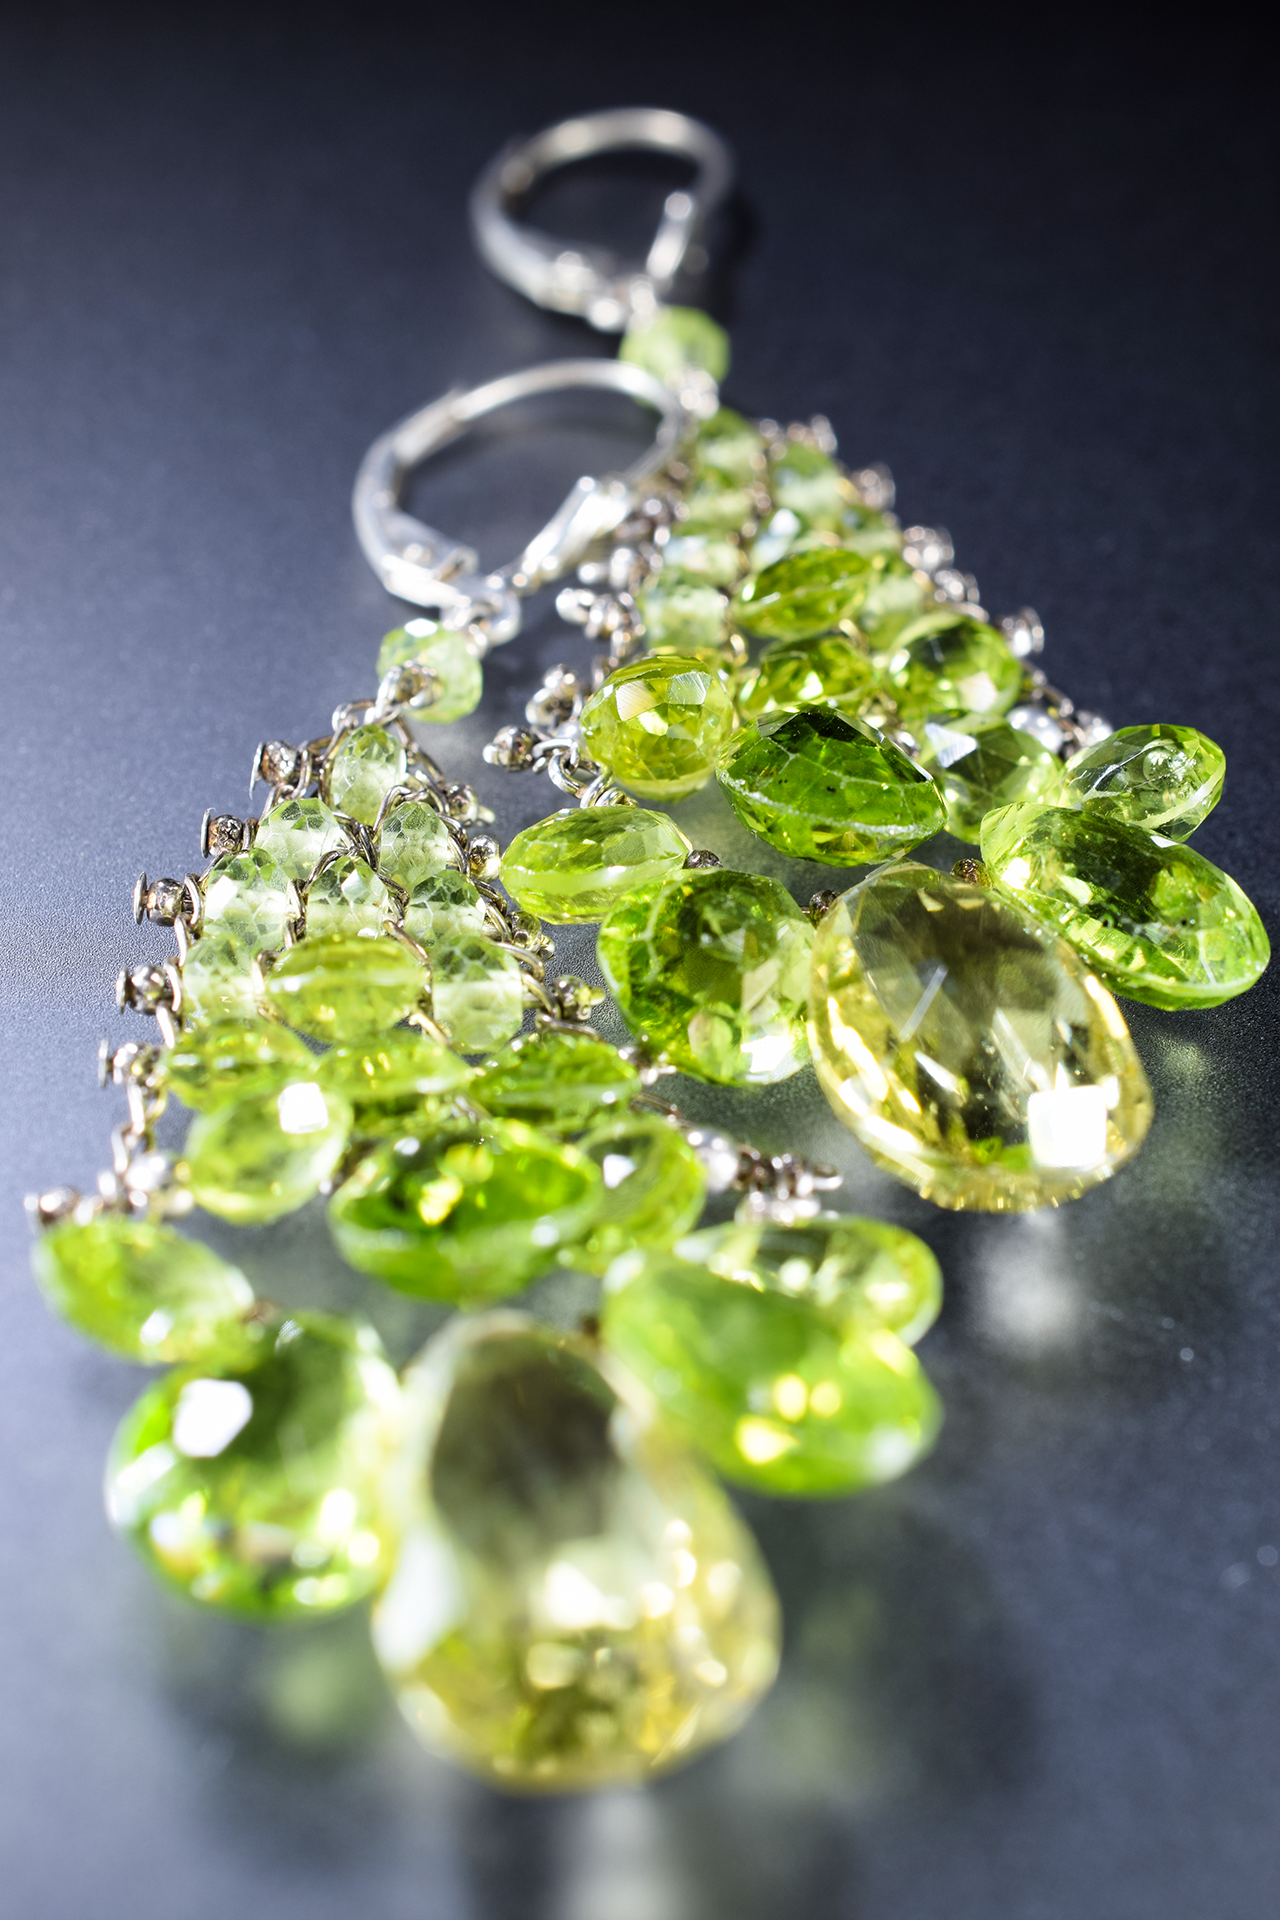 Peridot and Sterling Silver Earrings